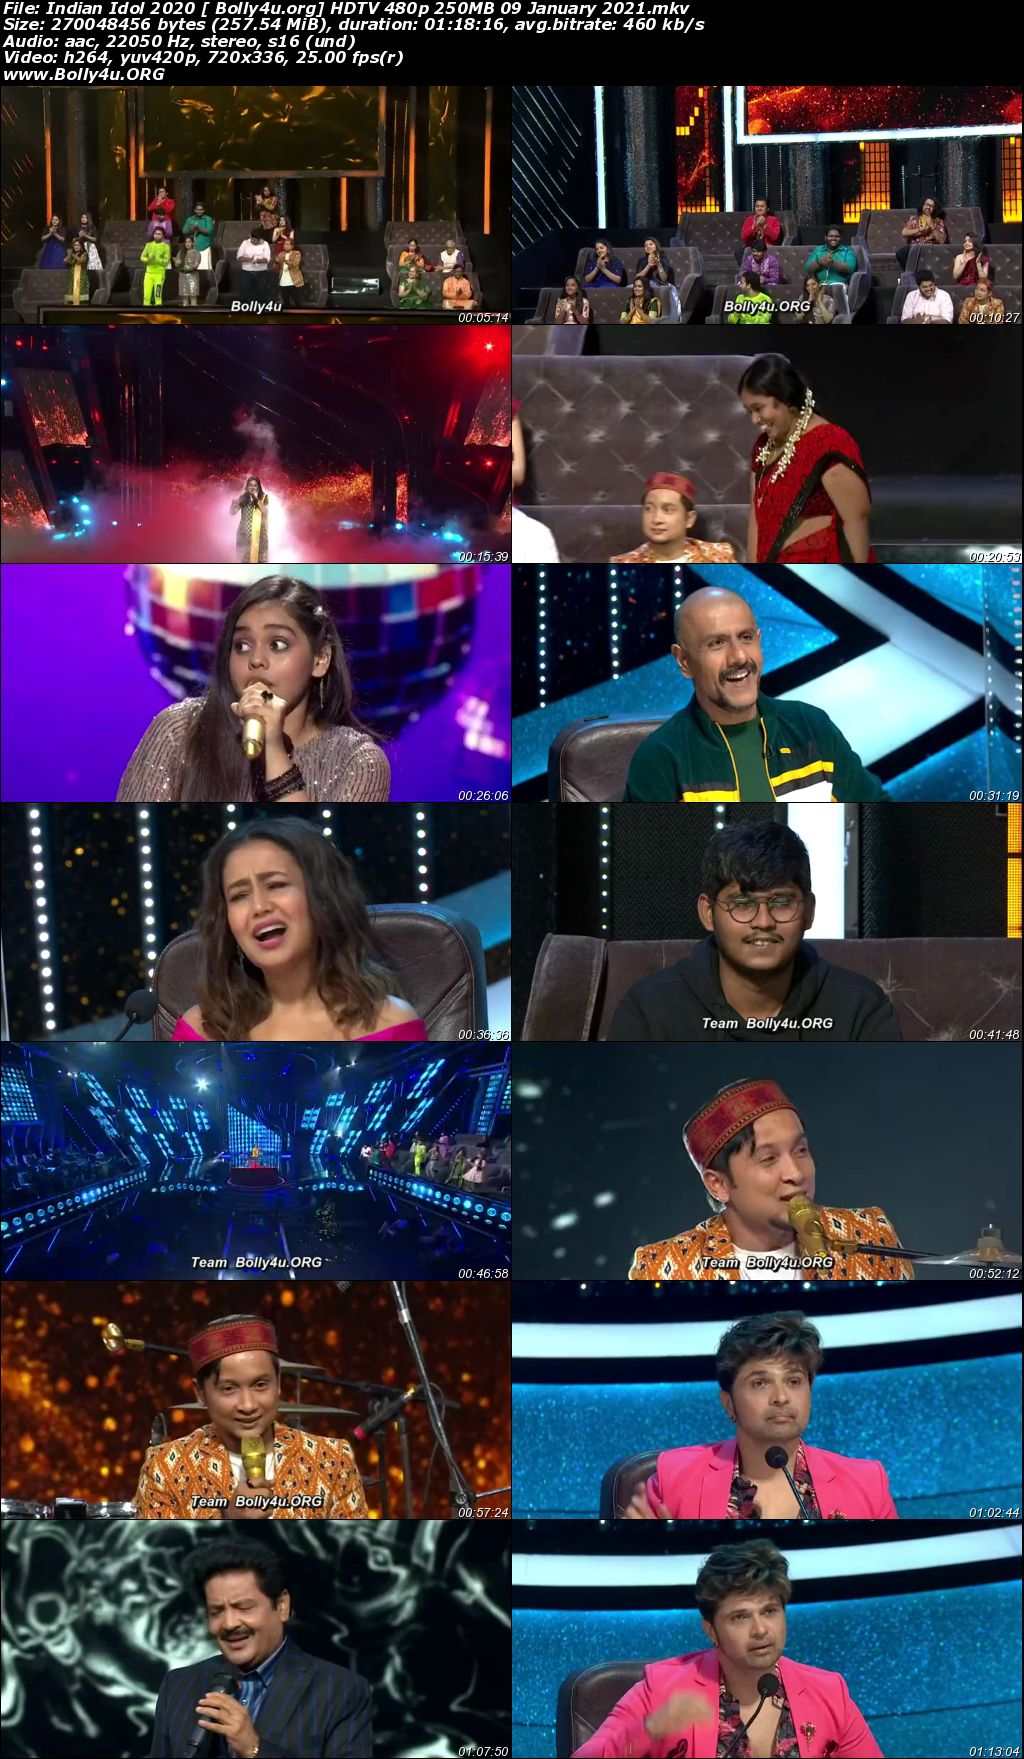 Indian Idol 2020 HDTV 480p 250MB 09 January 2021 Download